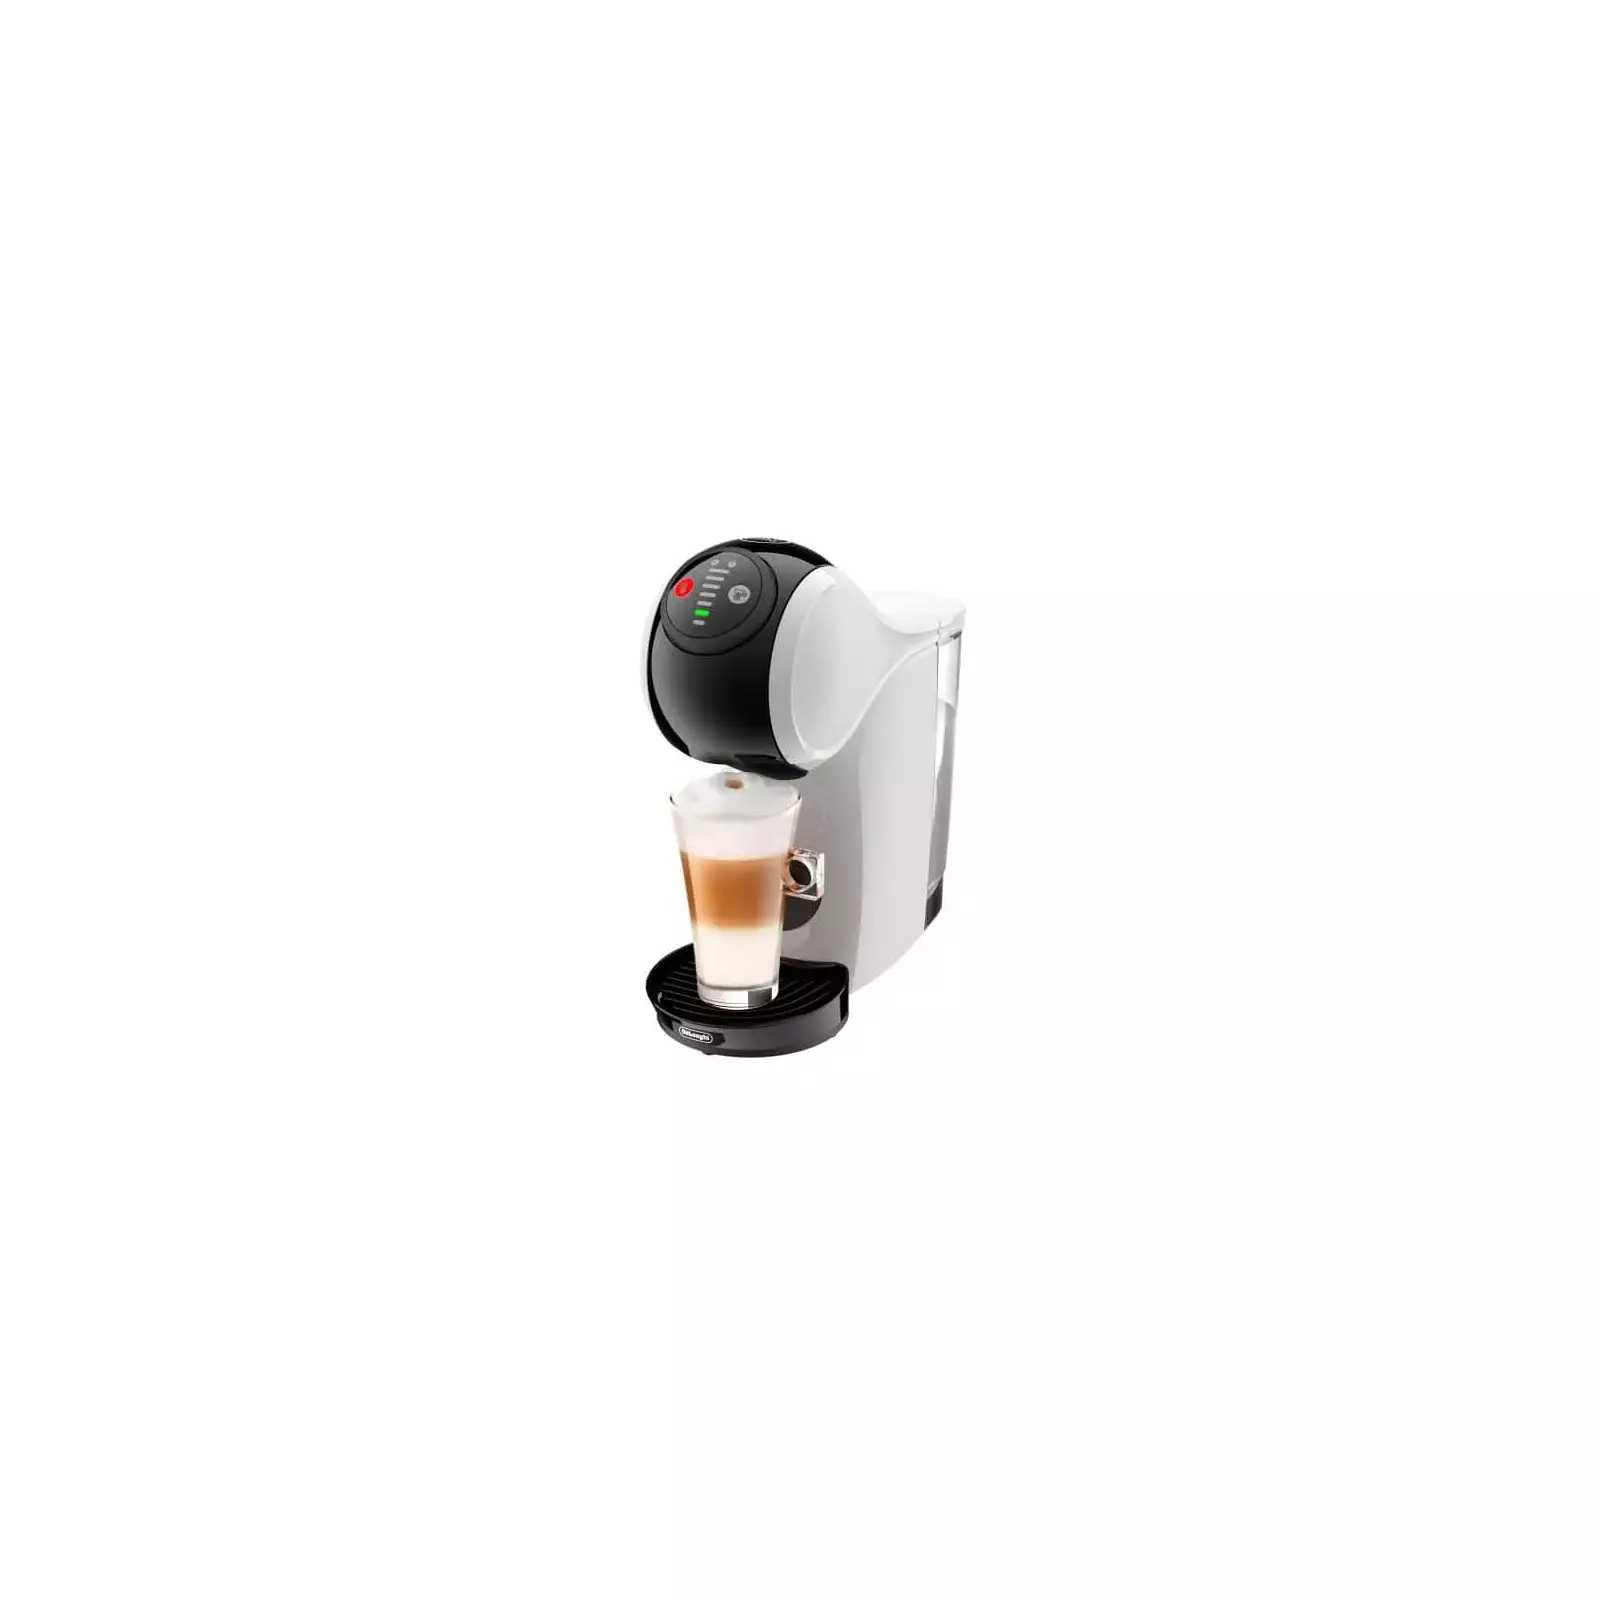 Delonghi dolce gusto genio s review: Does this affordable coffee machine  deliver?